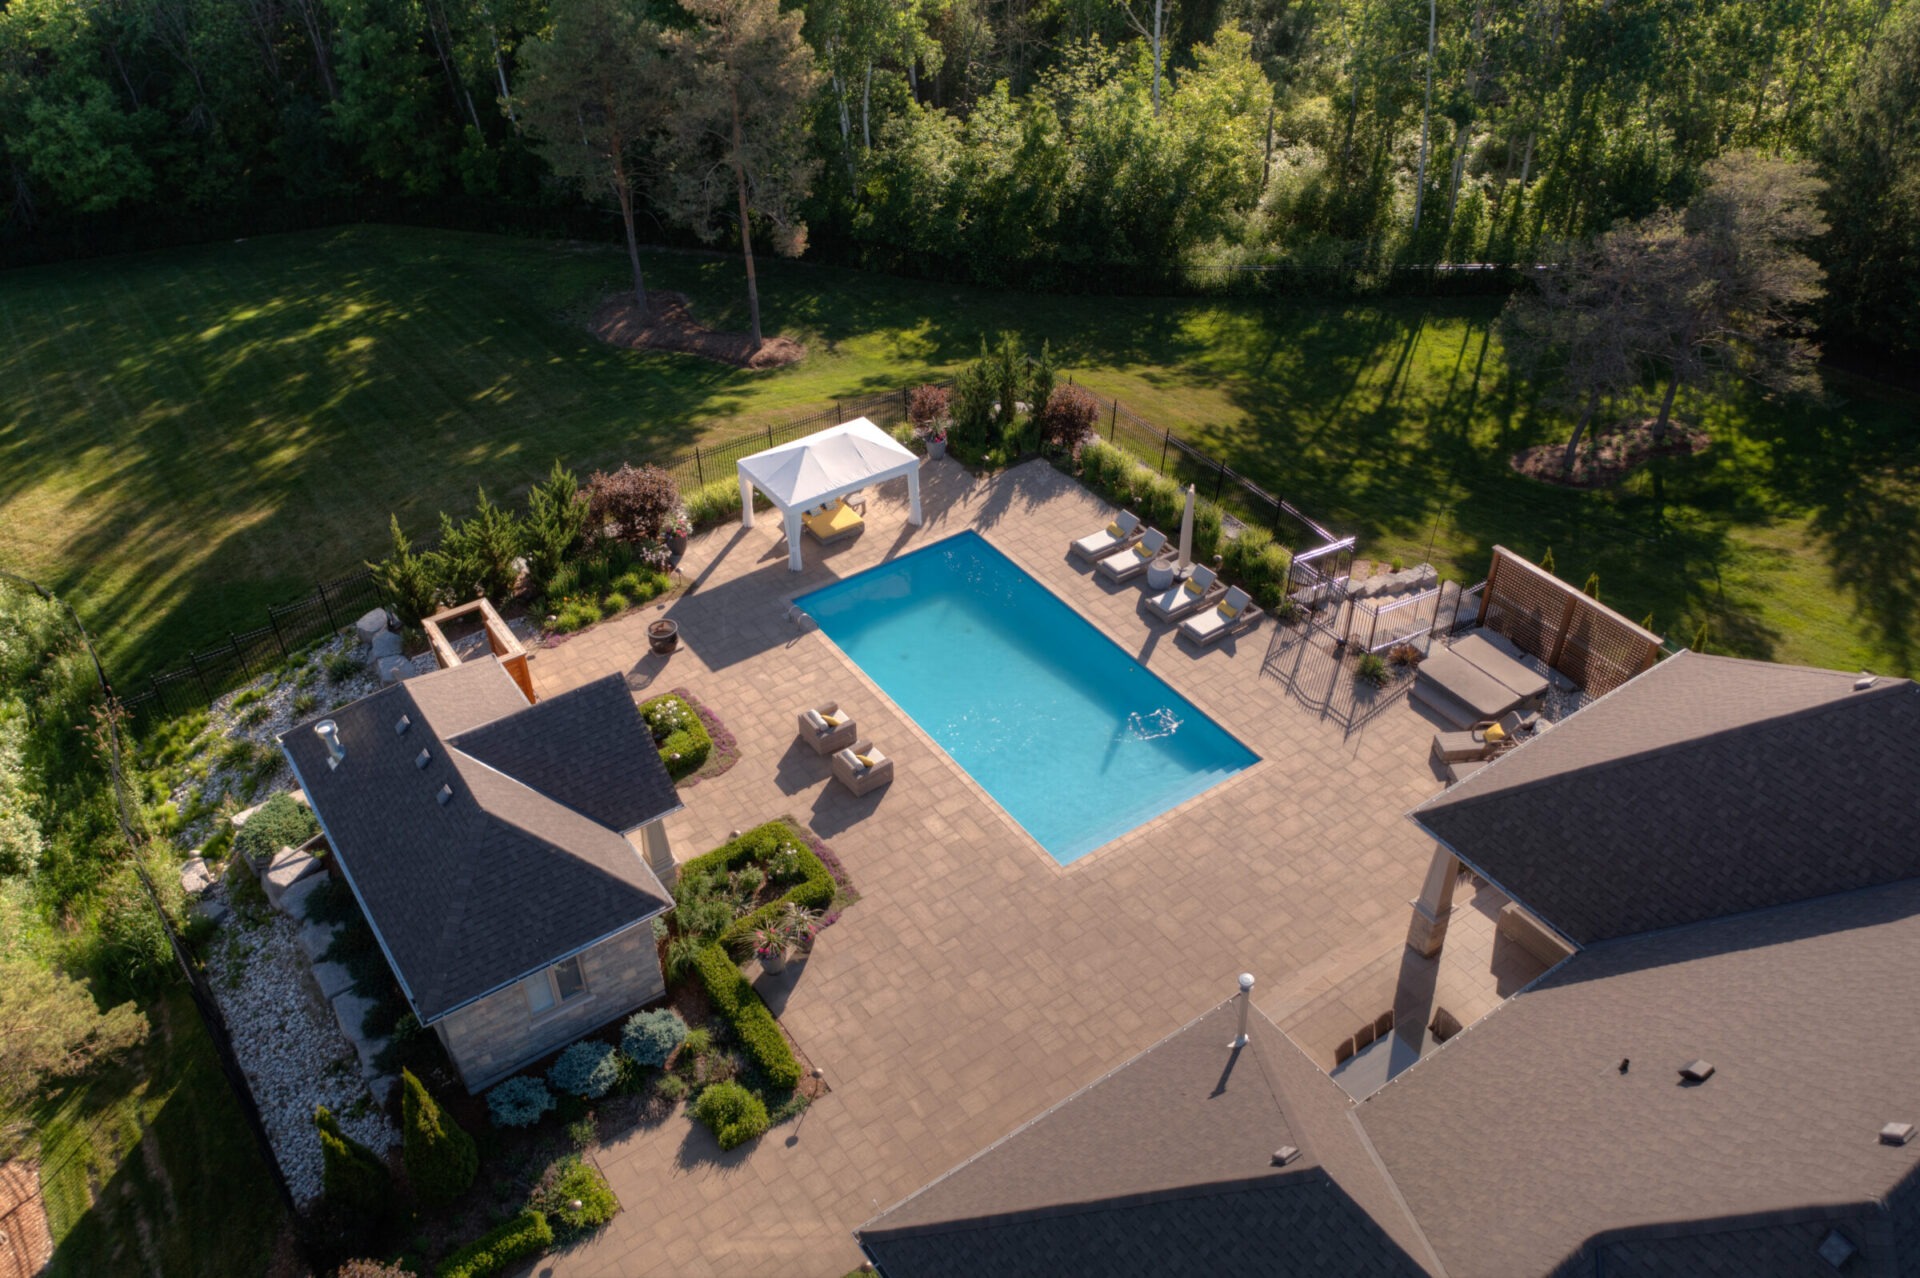 Aerial view of a residential backyard with an inground swimming pool, patio area, outdoor furniture, neatly landscaped garden, and adjoining house roofs.